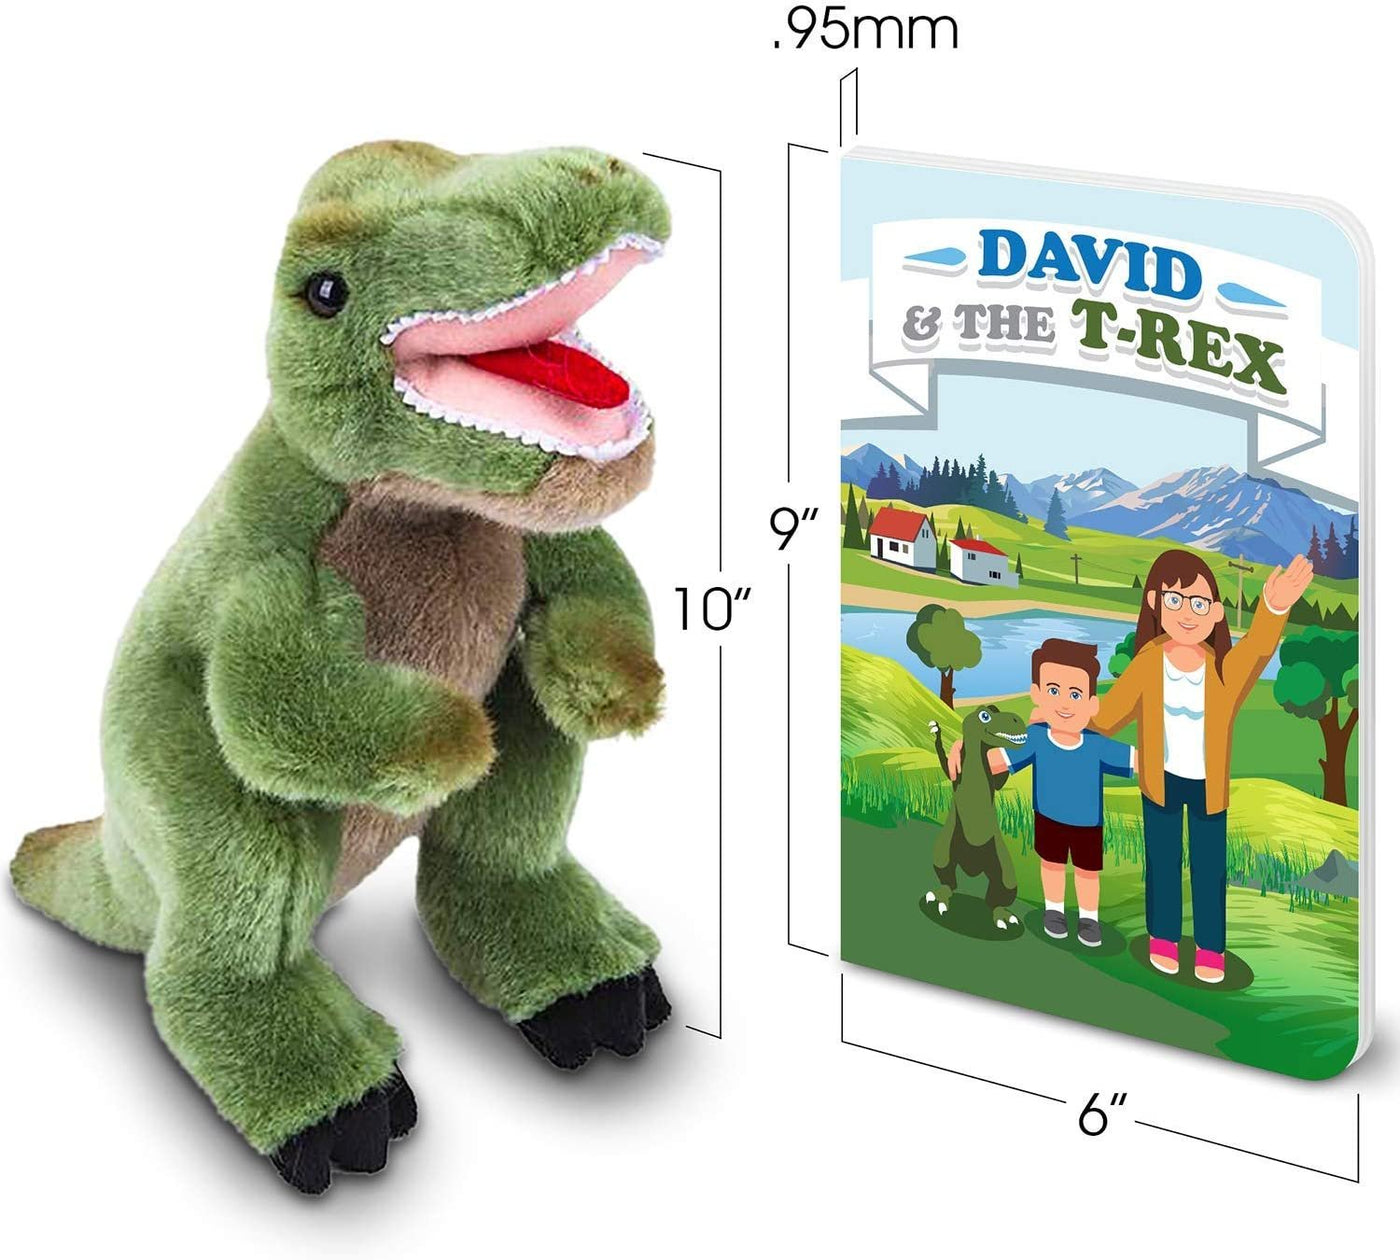 Educational Book for Kids with T-Rex Dinosaur Plush Toy, Fun Children’s Learning Booklet About The Environment, Super-Soft and Cuddly Stuffed Animal, Best Gift for Boys and Girls